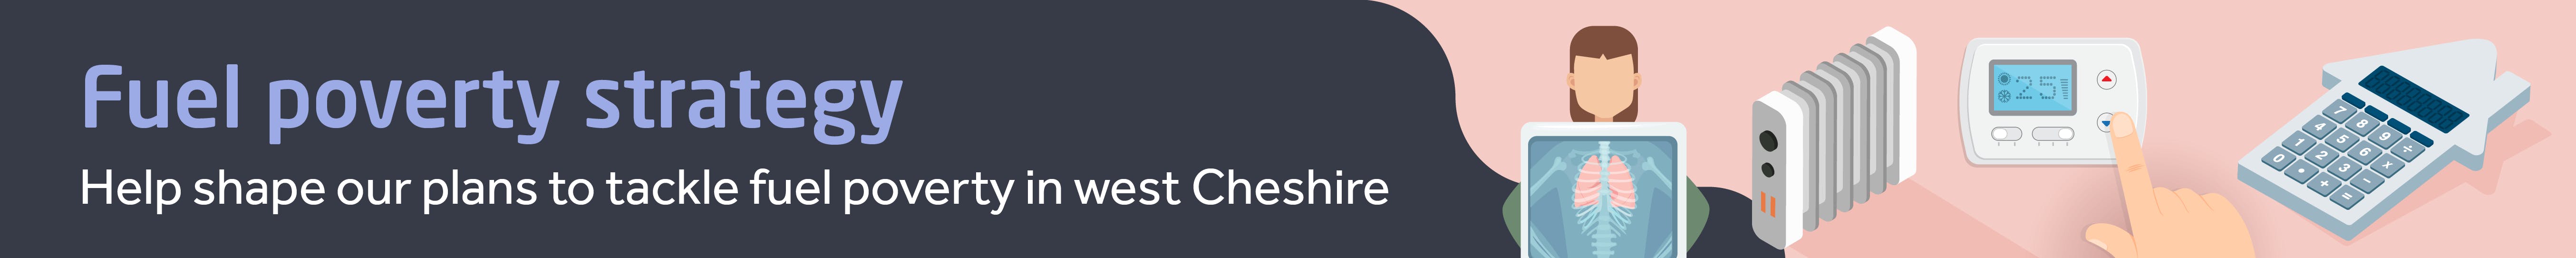 Fuel poverty strategy - Help shape our plans to tackle fuel poverty in west Cheshire